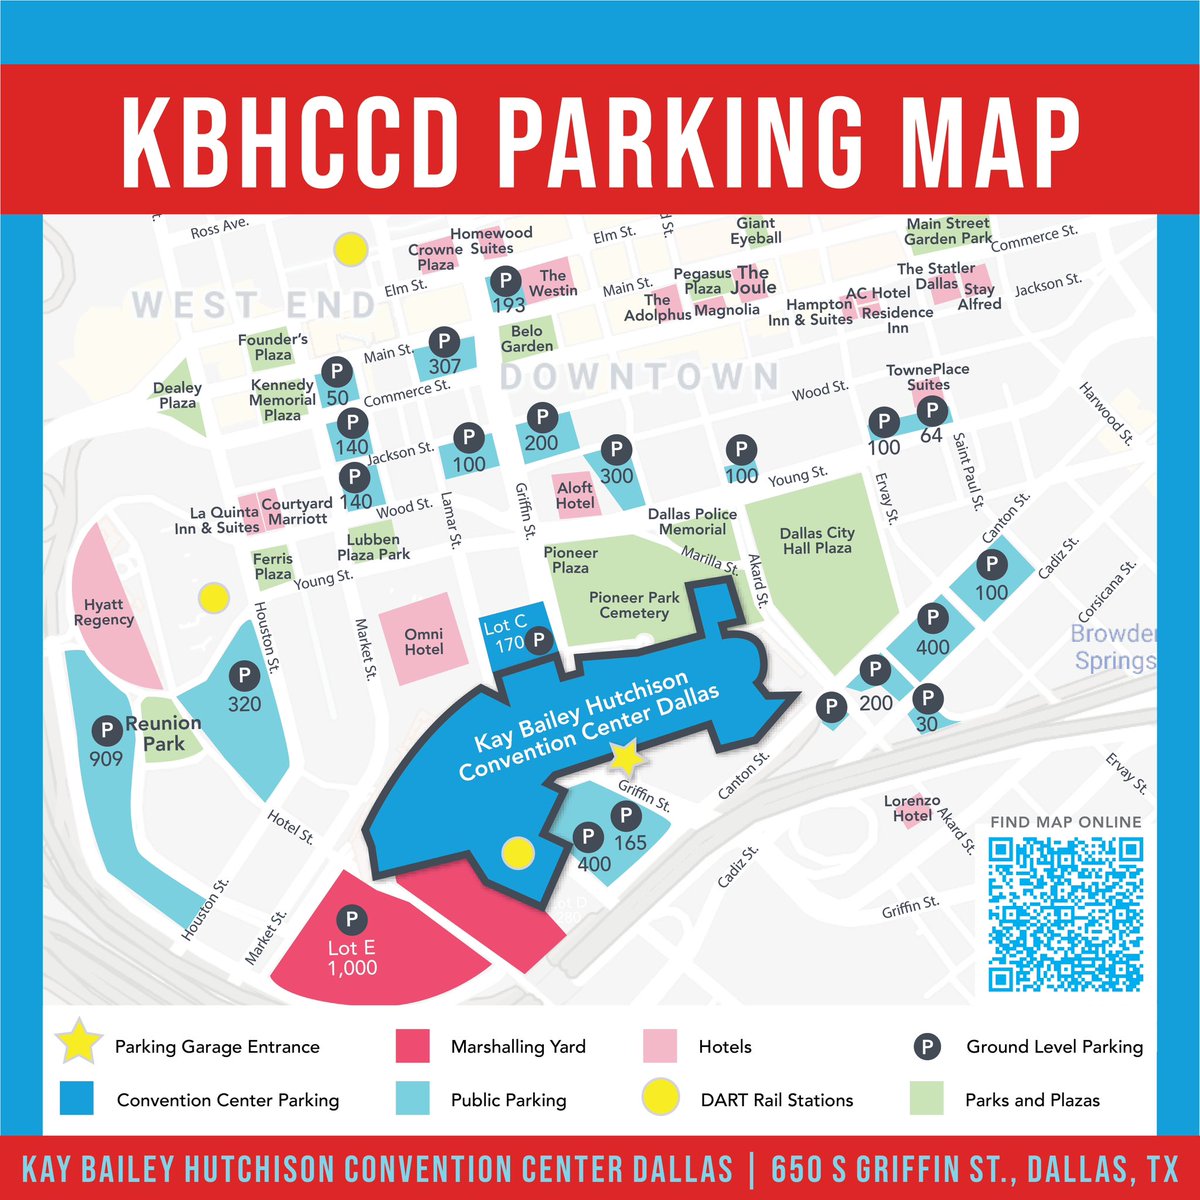 𝗥𝗜𝗗𝗘𝗦𝗛𝗔𝗥𝗘 – Utilize Uber and Lyft, with drop-off at Lower C Driveway (bit.ly/KBHCCDLowerC)
𝗣𝗨𝗕𝗟𝗜𝗖 𝗧𝗥𝗔𝗡𝗦𝗣𝗢𝗥𝗧/𝗗𝗔𝗥𝗧 – Utilize public transport/@dartmedia with drop-off at Convention Center Station beneath KBHCCD (bit.ly/KBHCCD_DARTSta…)…(2/3)